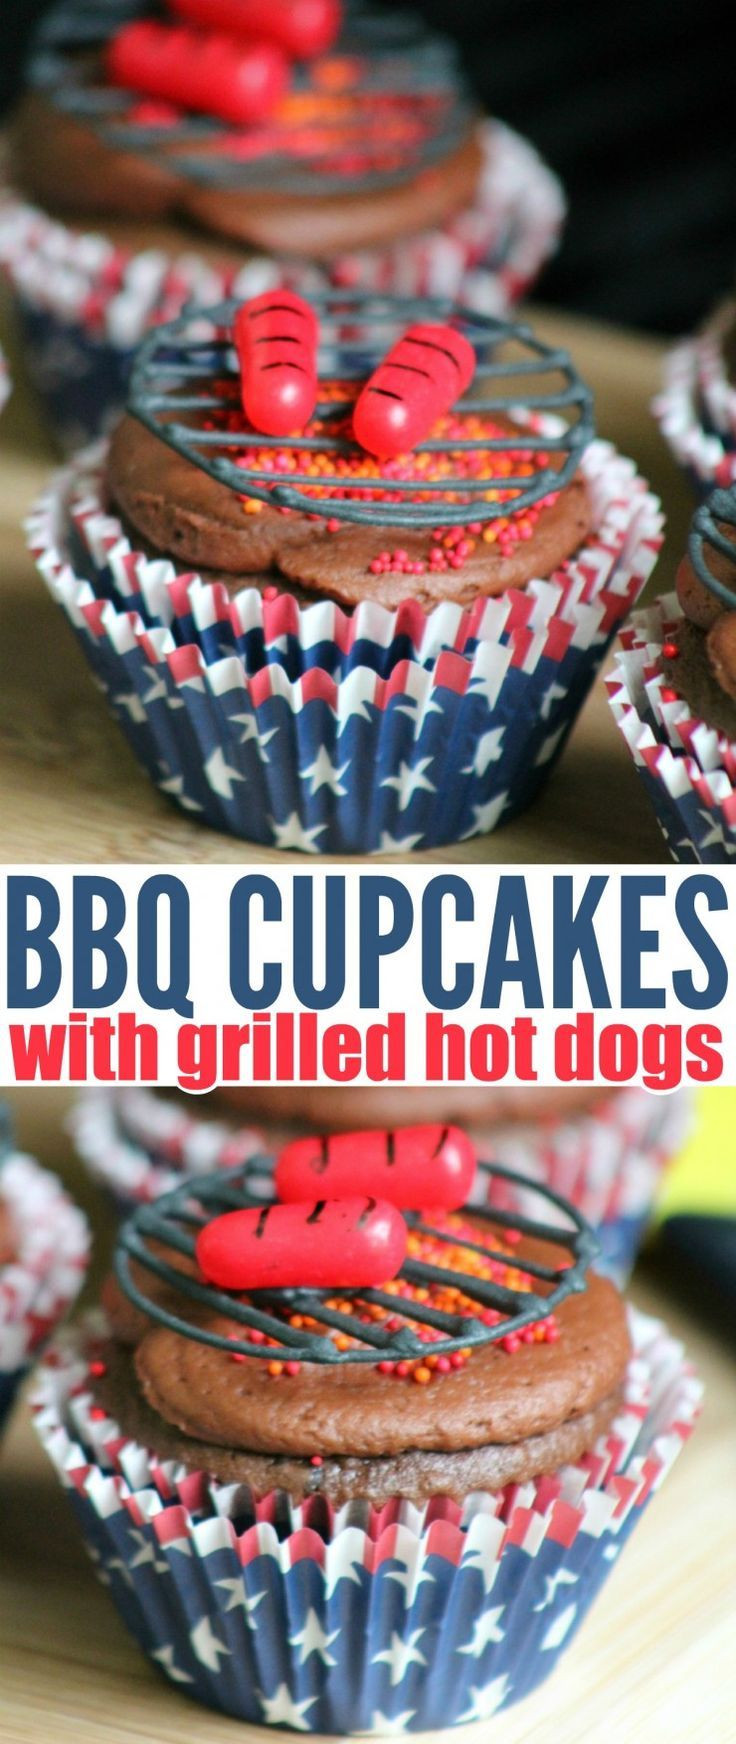 Memorial Day Cupcake Ideas
 These adorable BBQ Cupcakes with Grilled Hot Dogs really